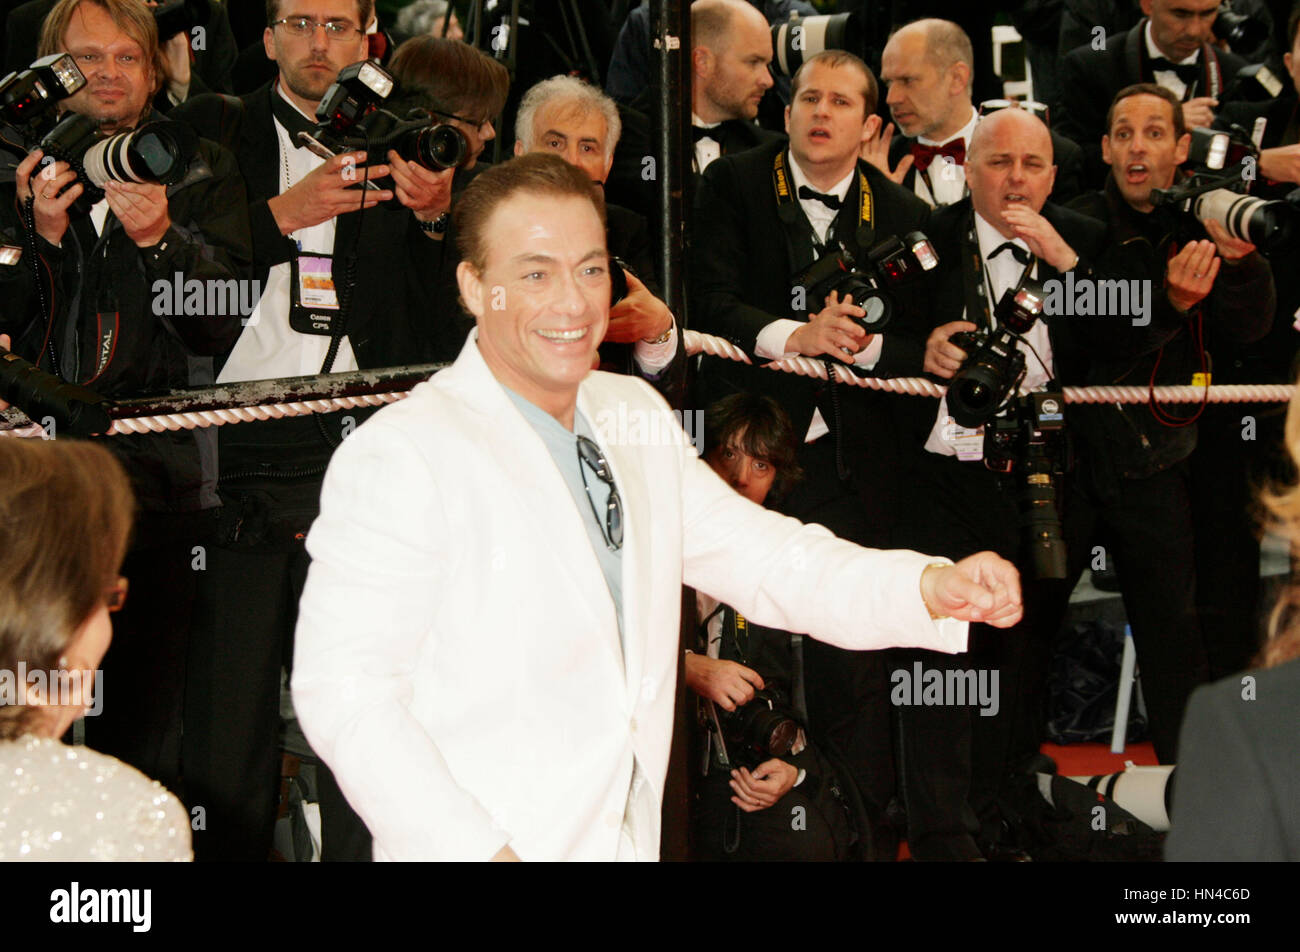 Jean Claude Van Damme arrives at the Un Conte De Noel premiere at the Palais des Festivals during the 61st Cannes International Film Festival on May 16, 2008 in Cannes, France. Photo by Francis Specker Stock Photo